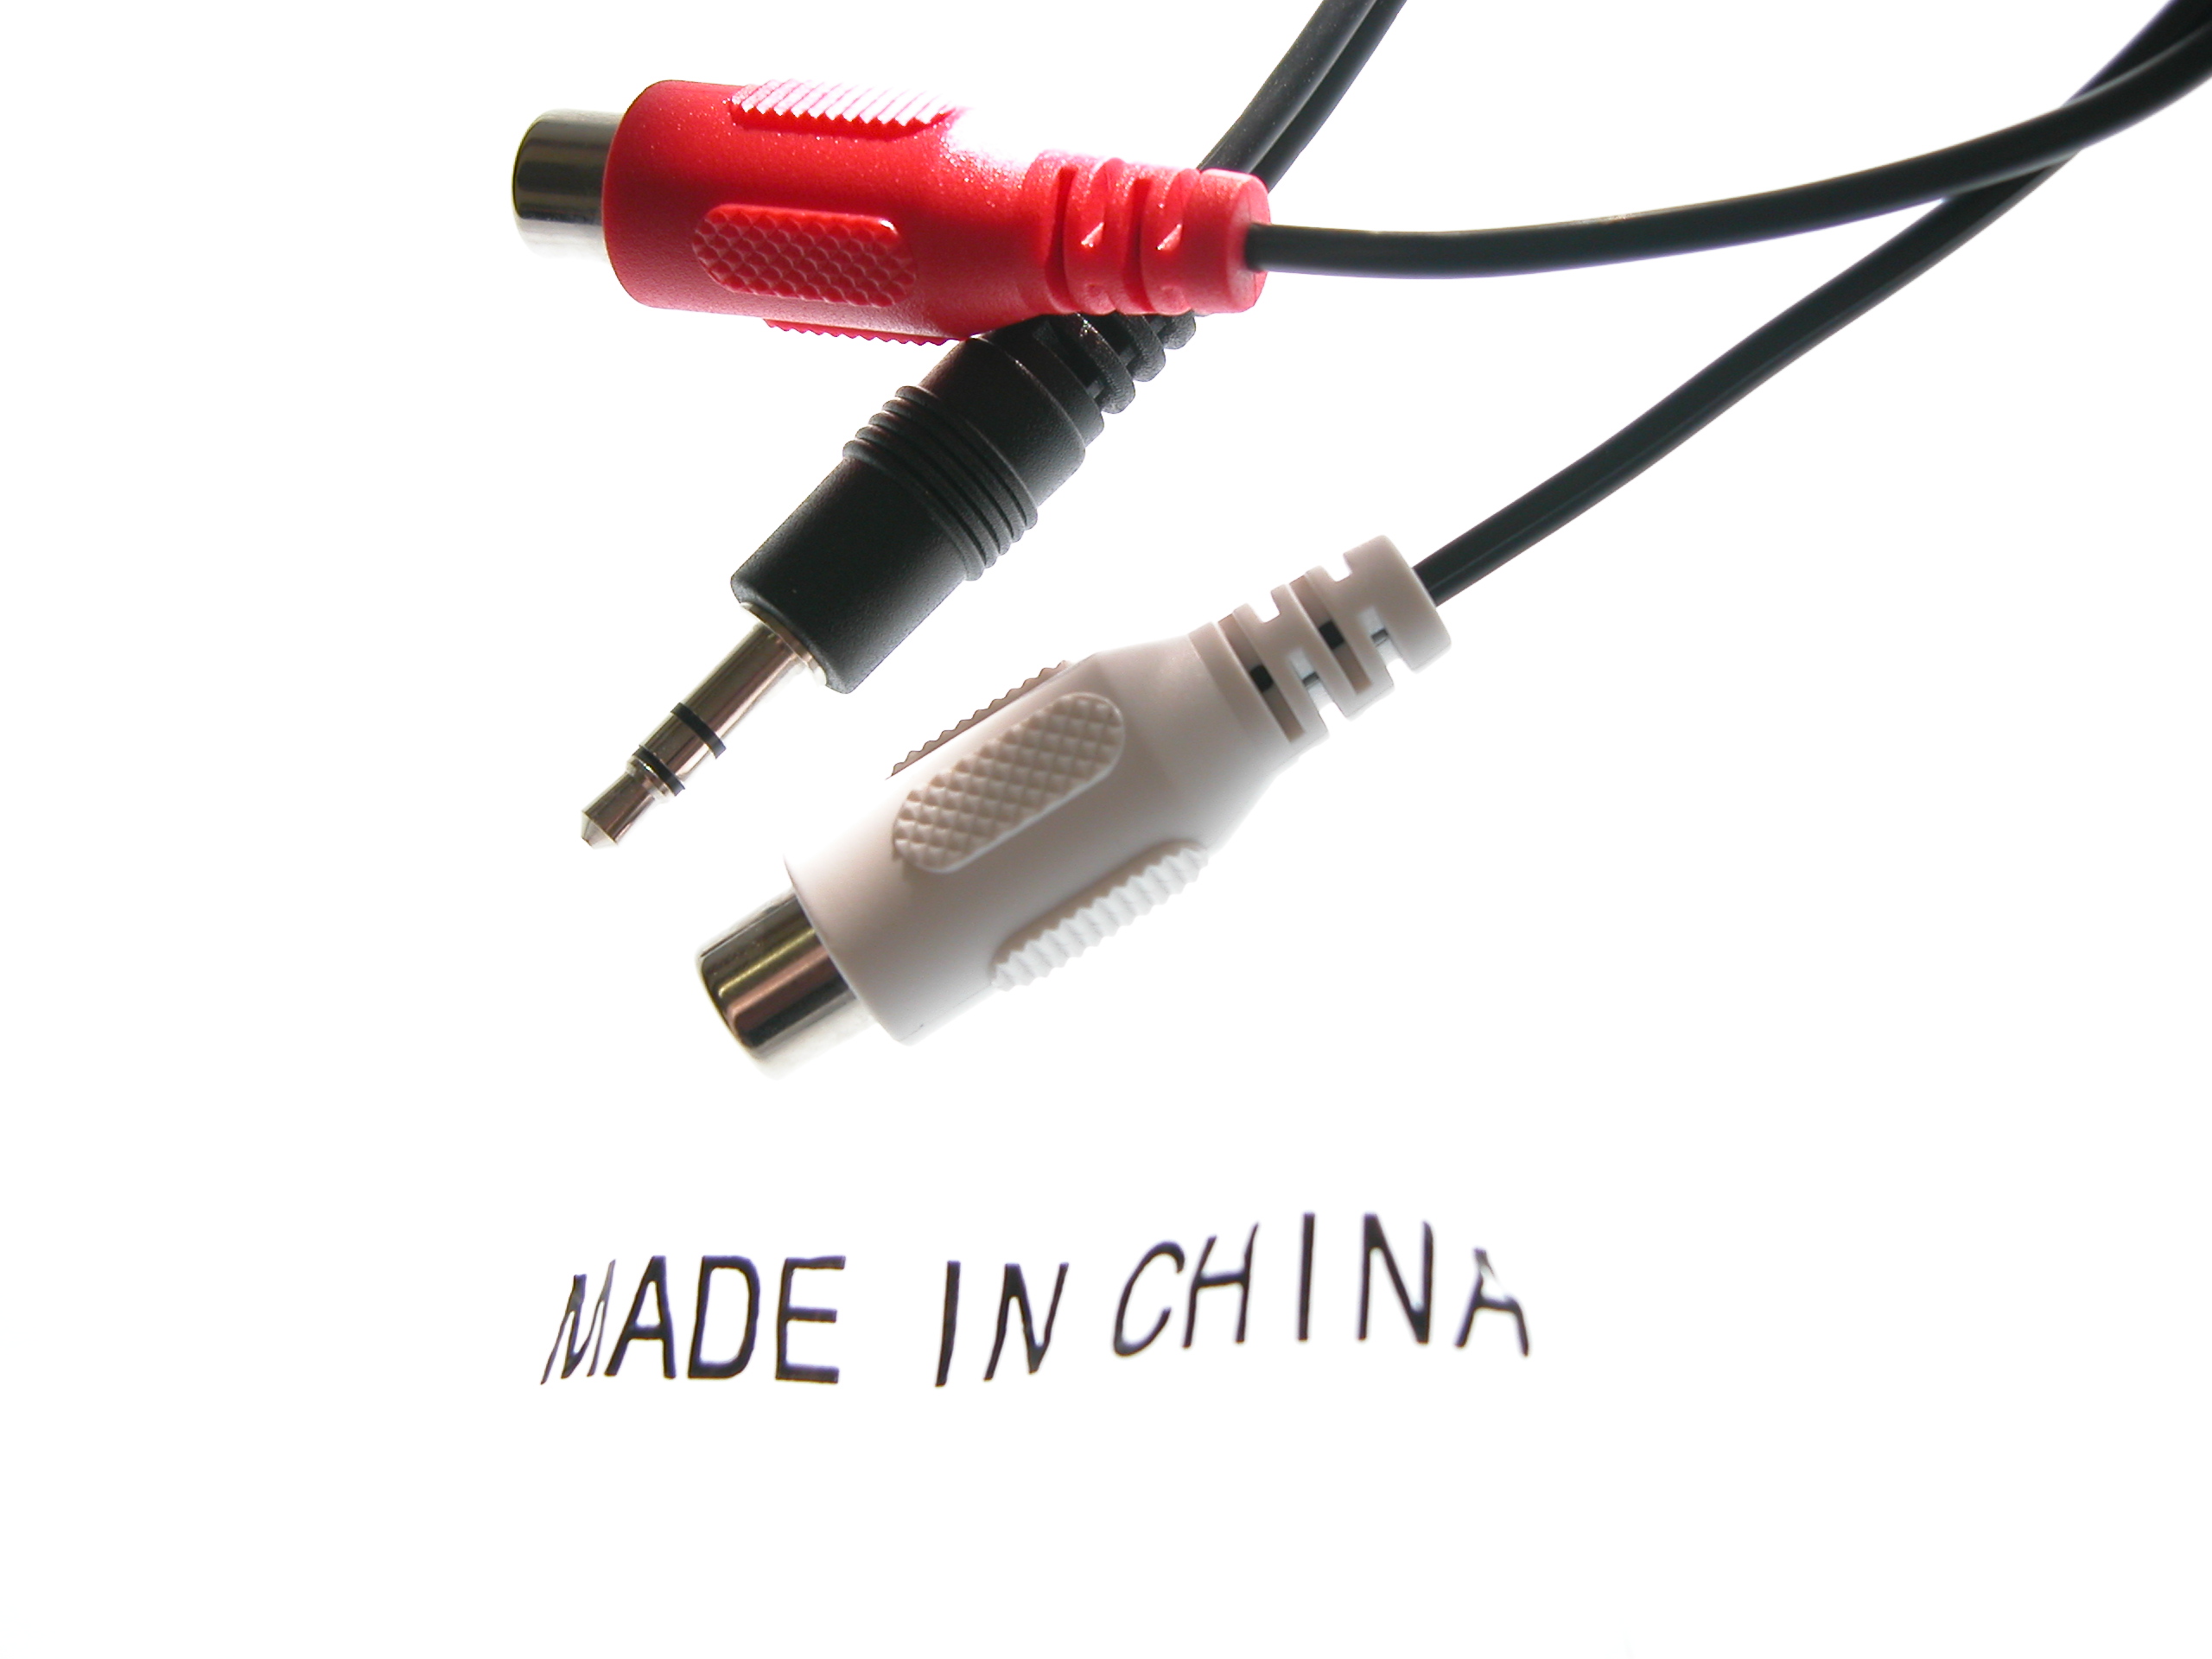 objects plastic computer connector connectors plug made in china madeinchina typo typography plugs tulipplug tulips tulip tulipplugs metal wire wires headphone audio sanserif